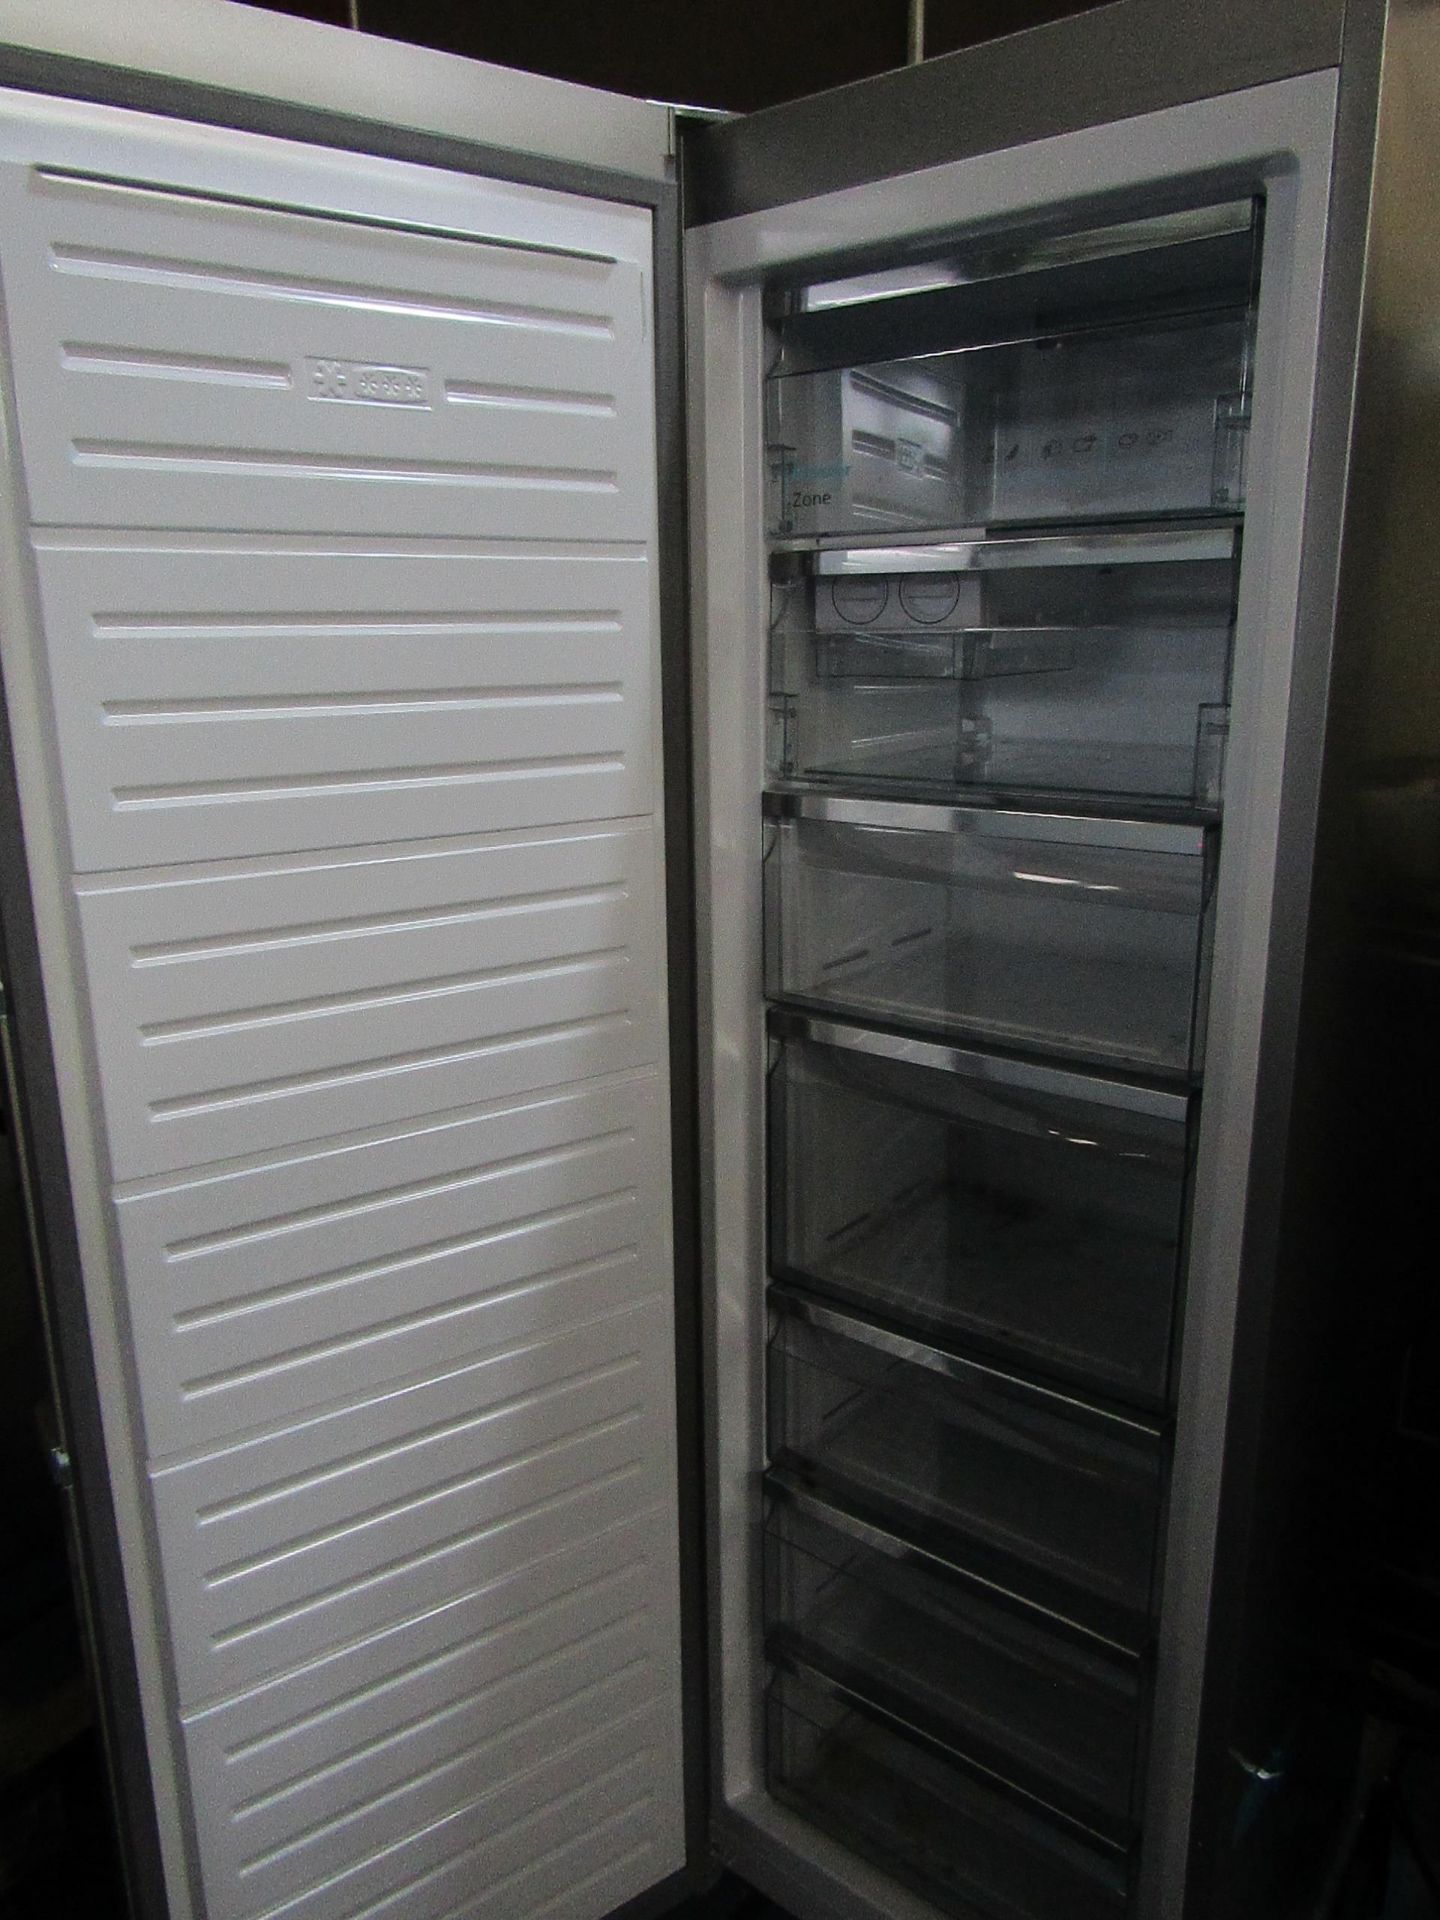 Sharp Tall Silver Freestanding Freezer - used, not getting cold - Image 2 of 2